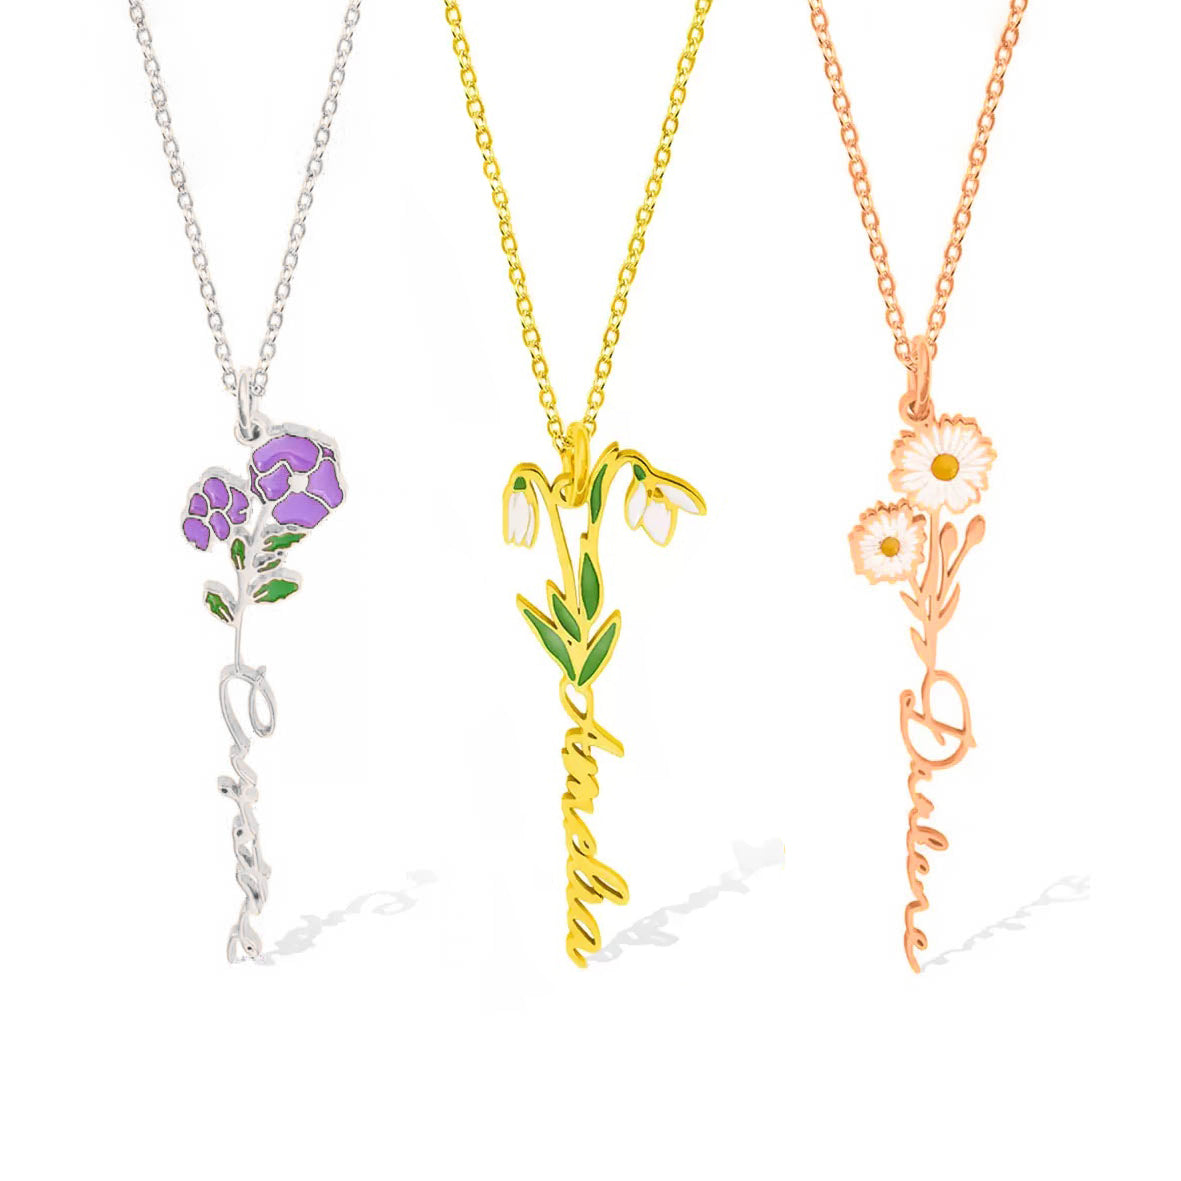 Liulin Sisters Necklace GiftsPendants Necklace Jewelry Gift for Big Middle  Little Sisters Friendship Gifts,Best Friends Forever Necklaces. -  Walmart.com